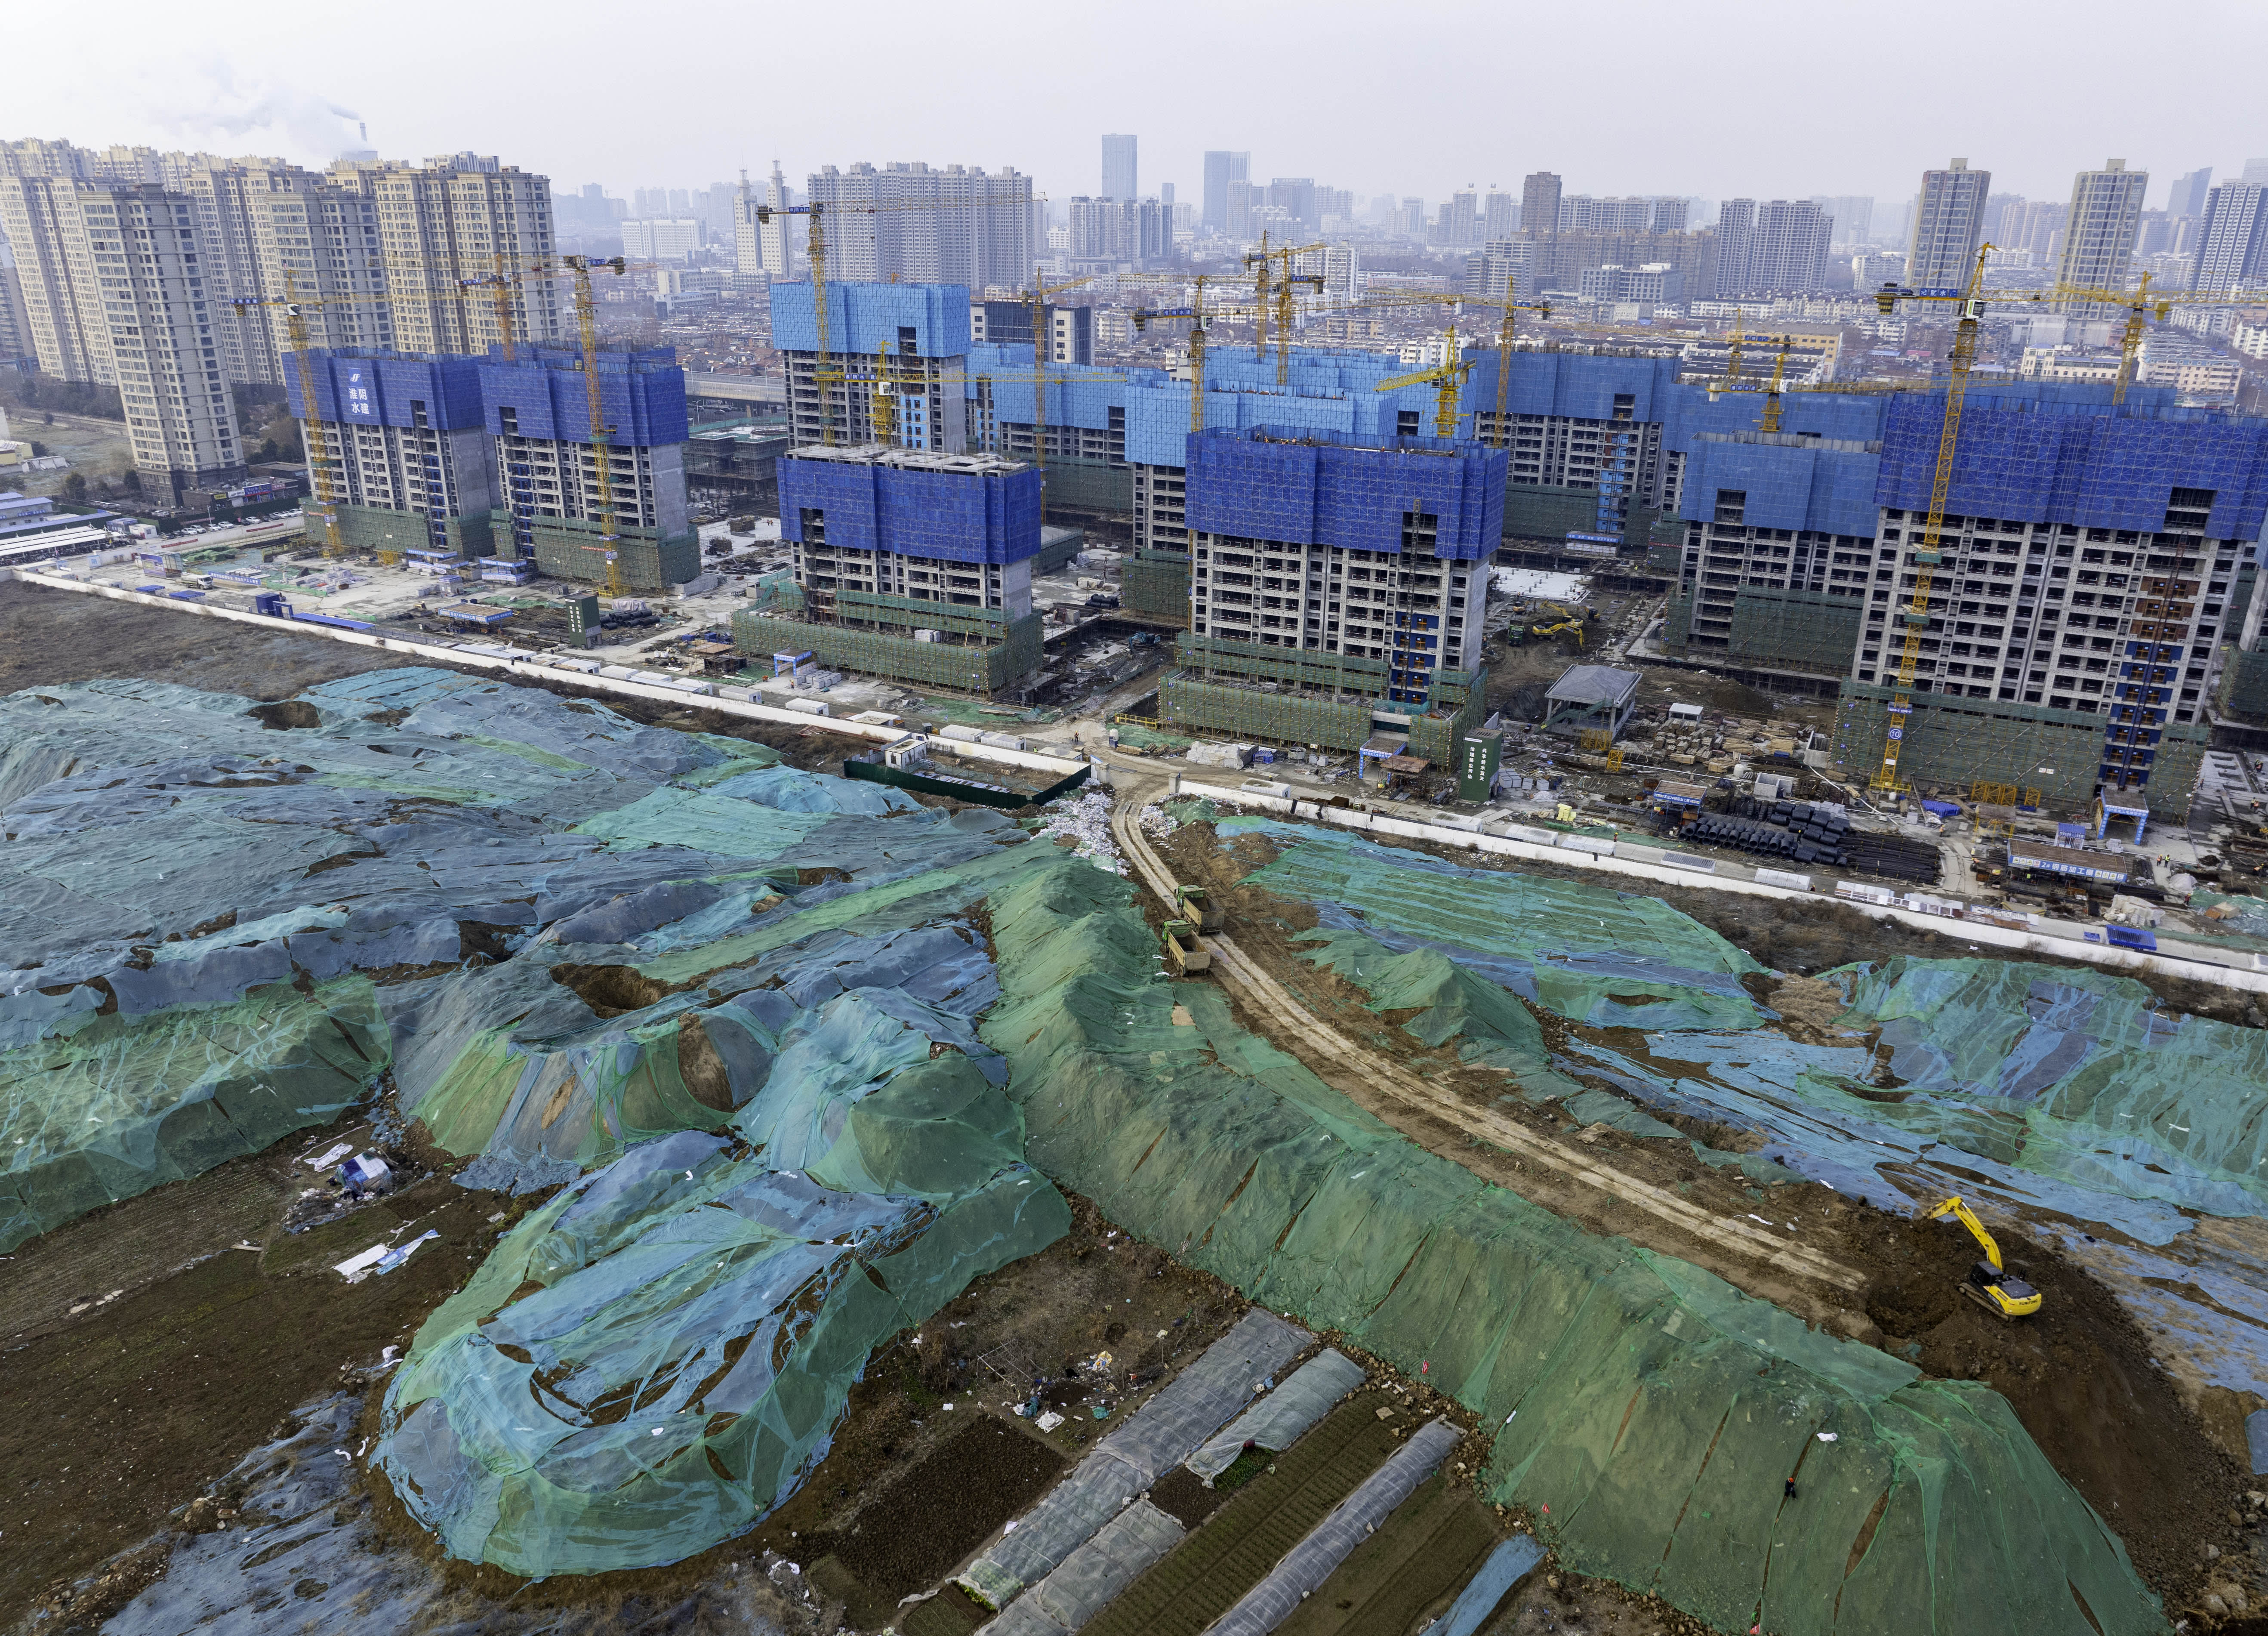 Demand for new housing in China will fall by 50% in the next decade